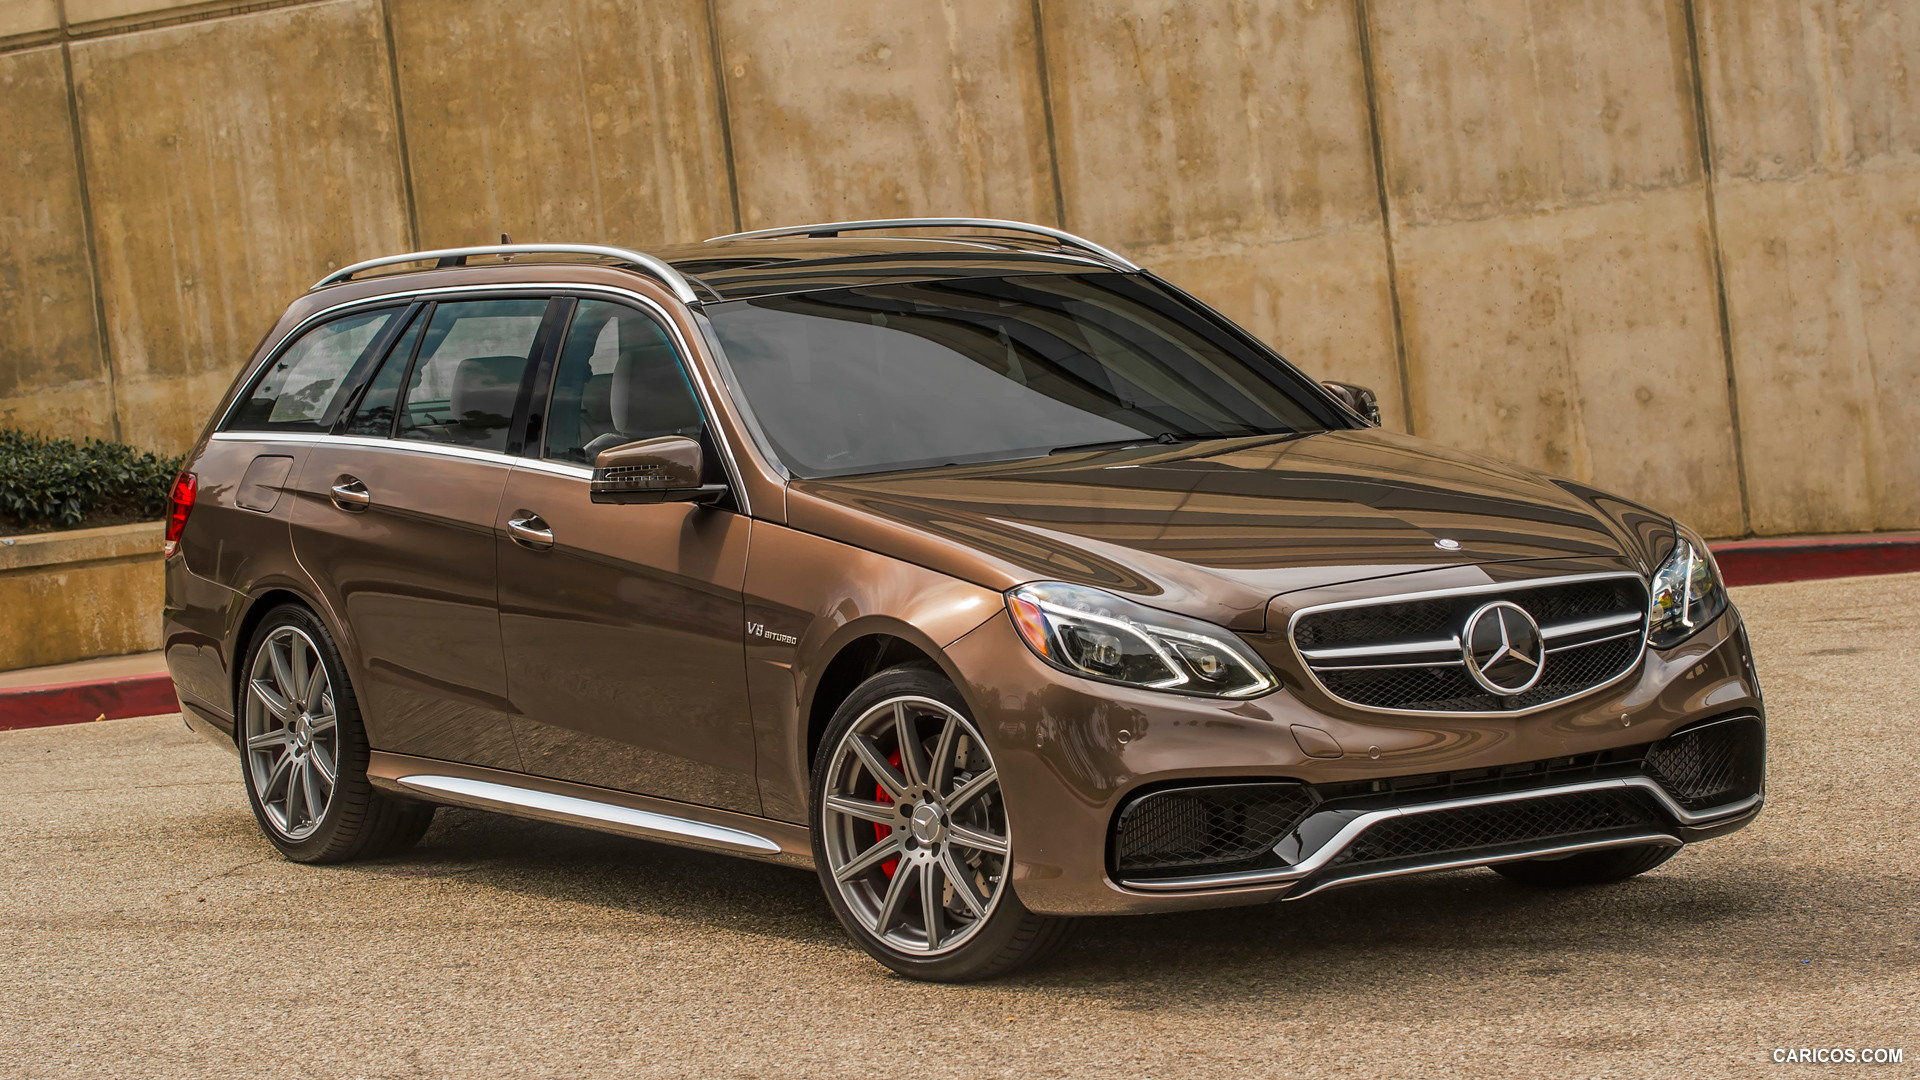  2014 Mercedes-Benz E 63 AMG S-Model Wagon (US Version) - Front, #15 of 27